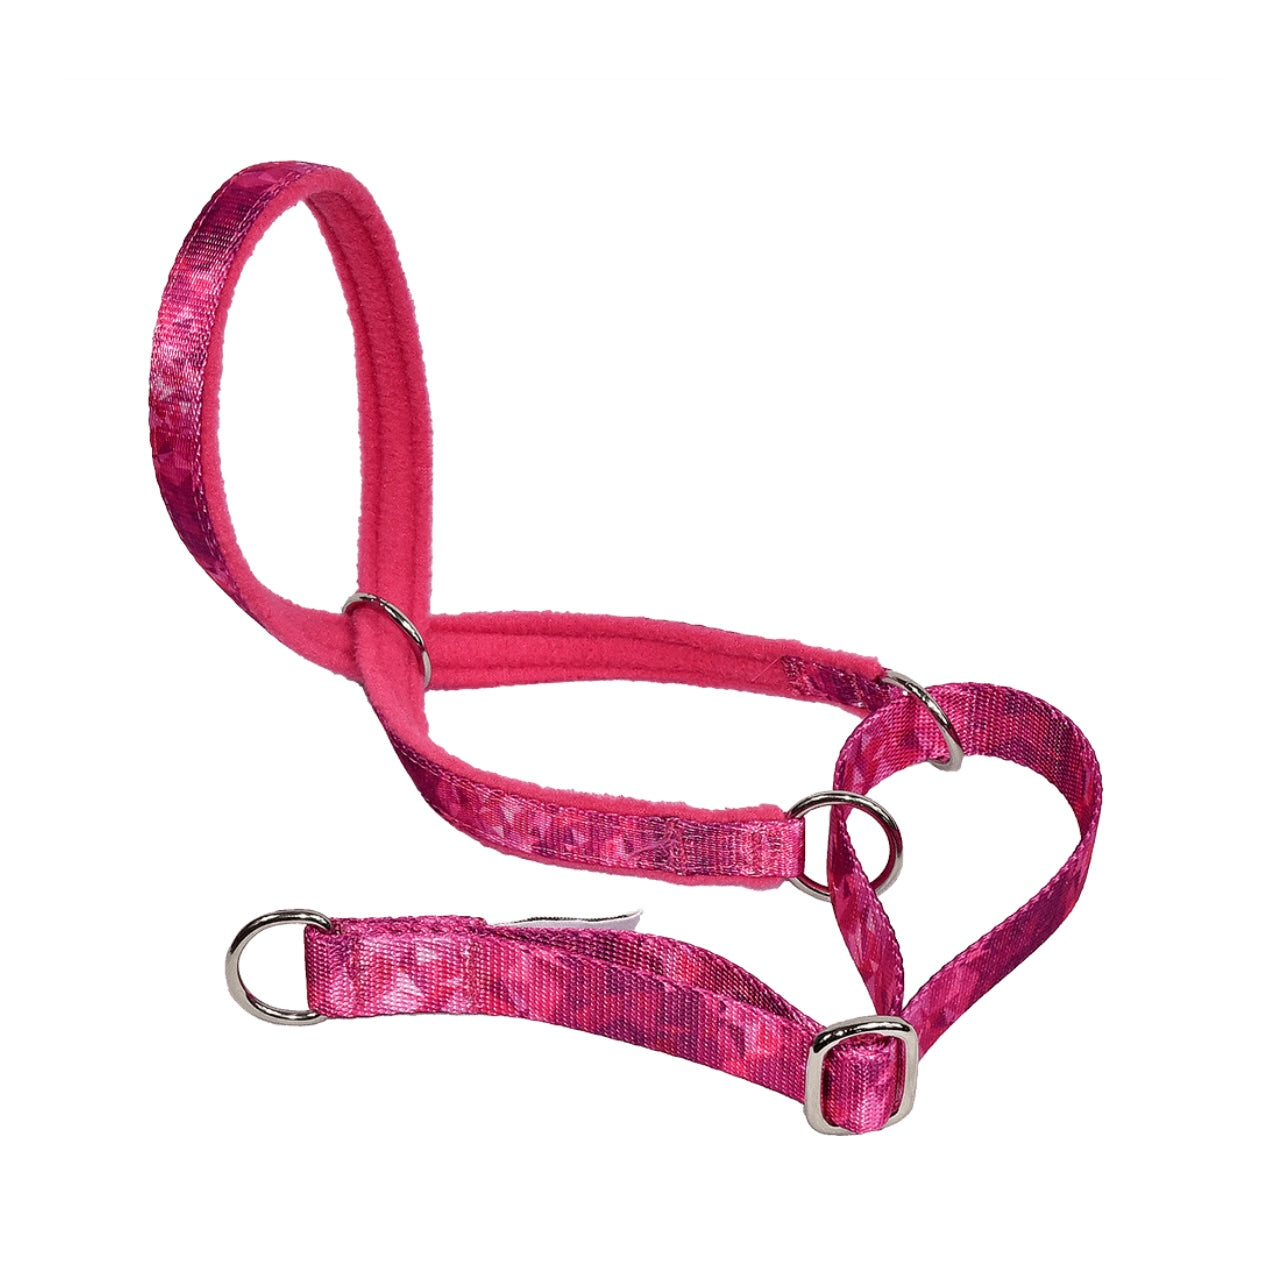 SWAGK9 Head Collar - Editions colours